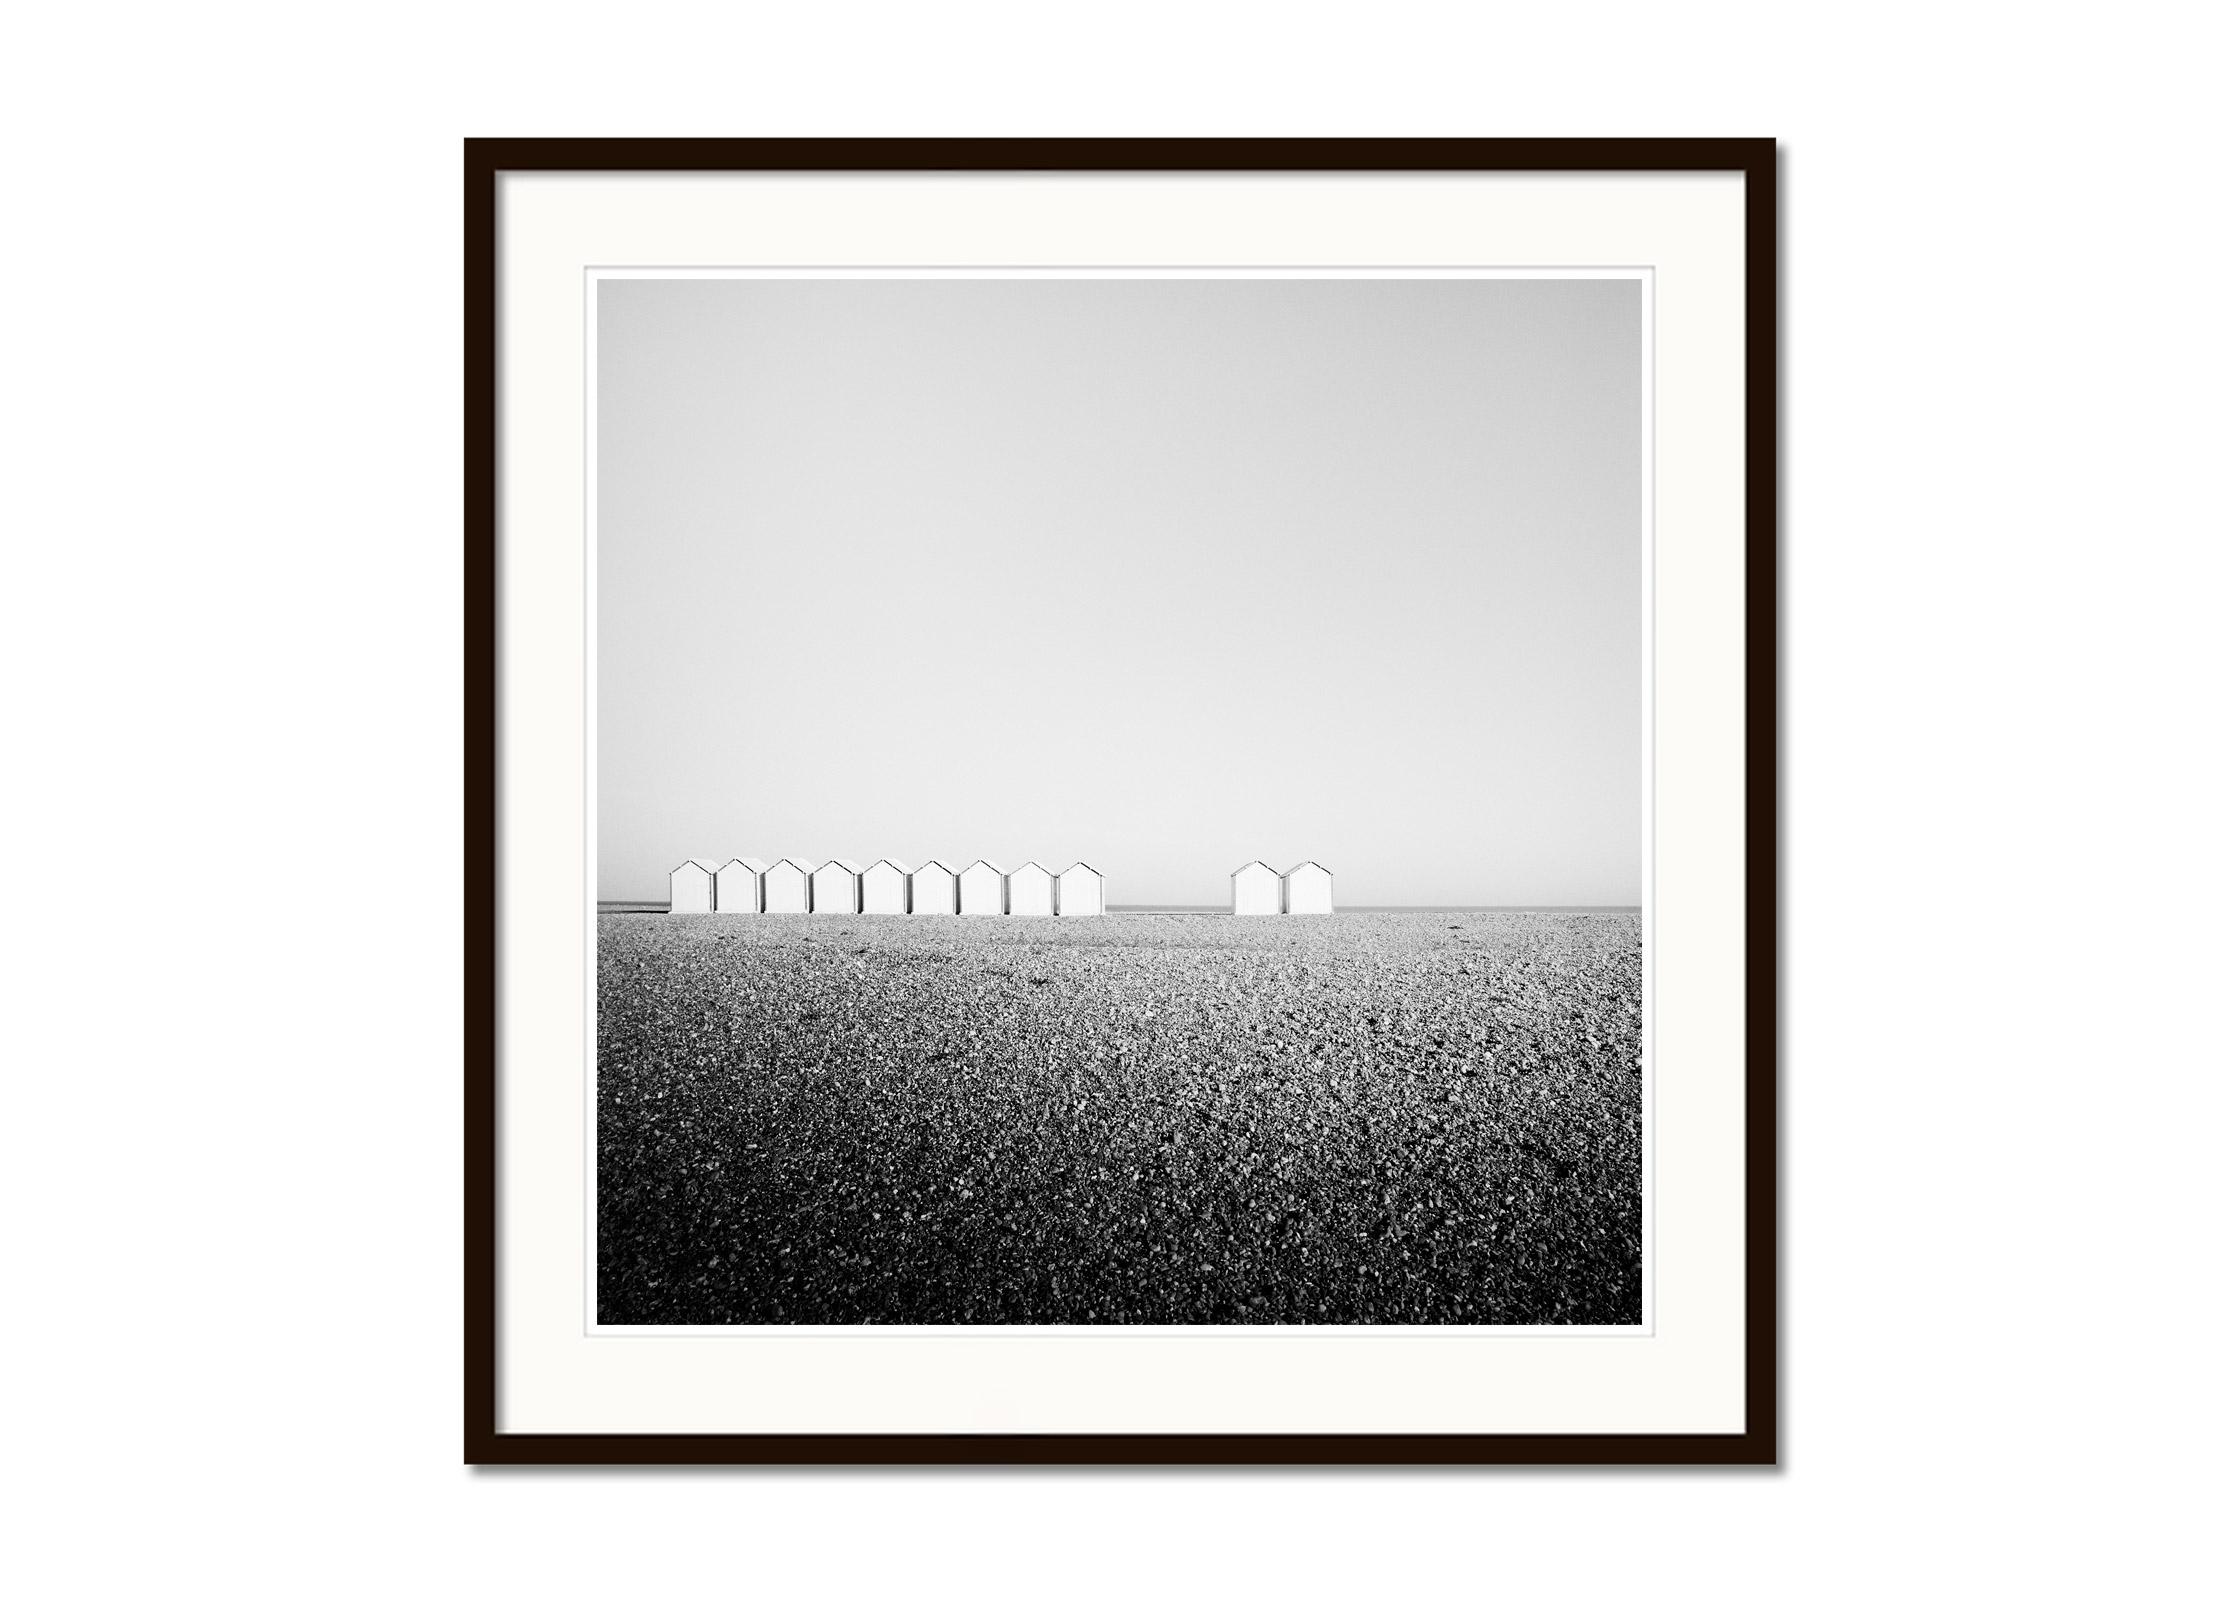 Eleven Huts, rocky beach, France, black and white fine art photography landscape - Gray Landscape Photograph by Gerald Berghammer